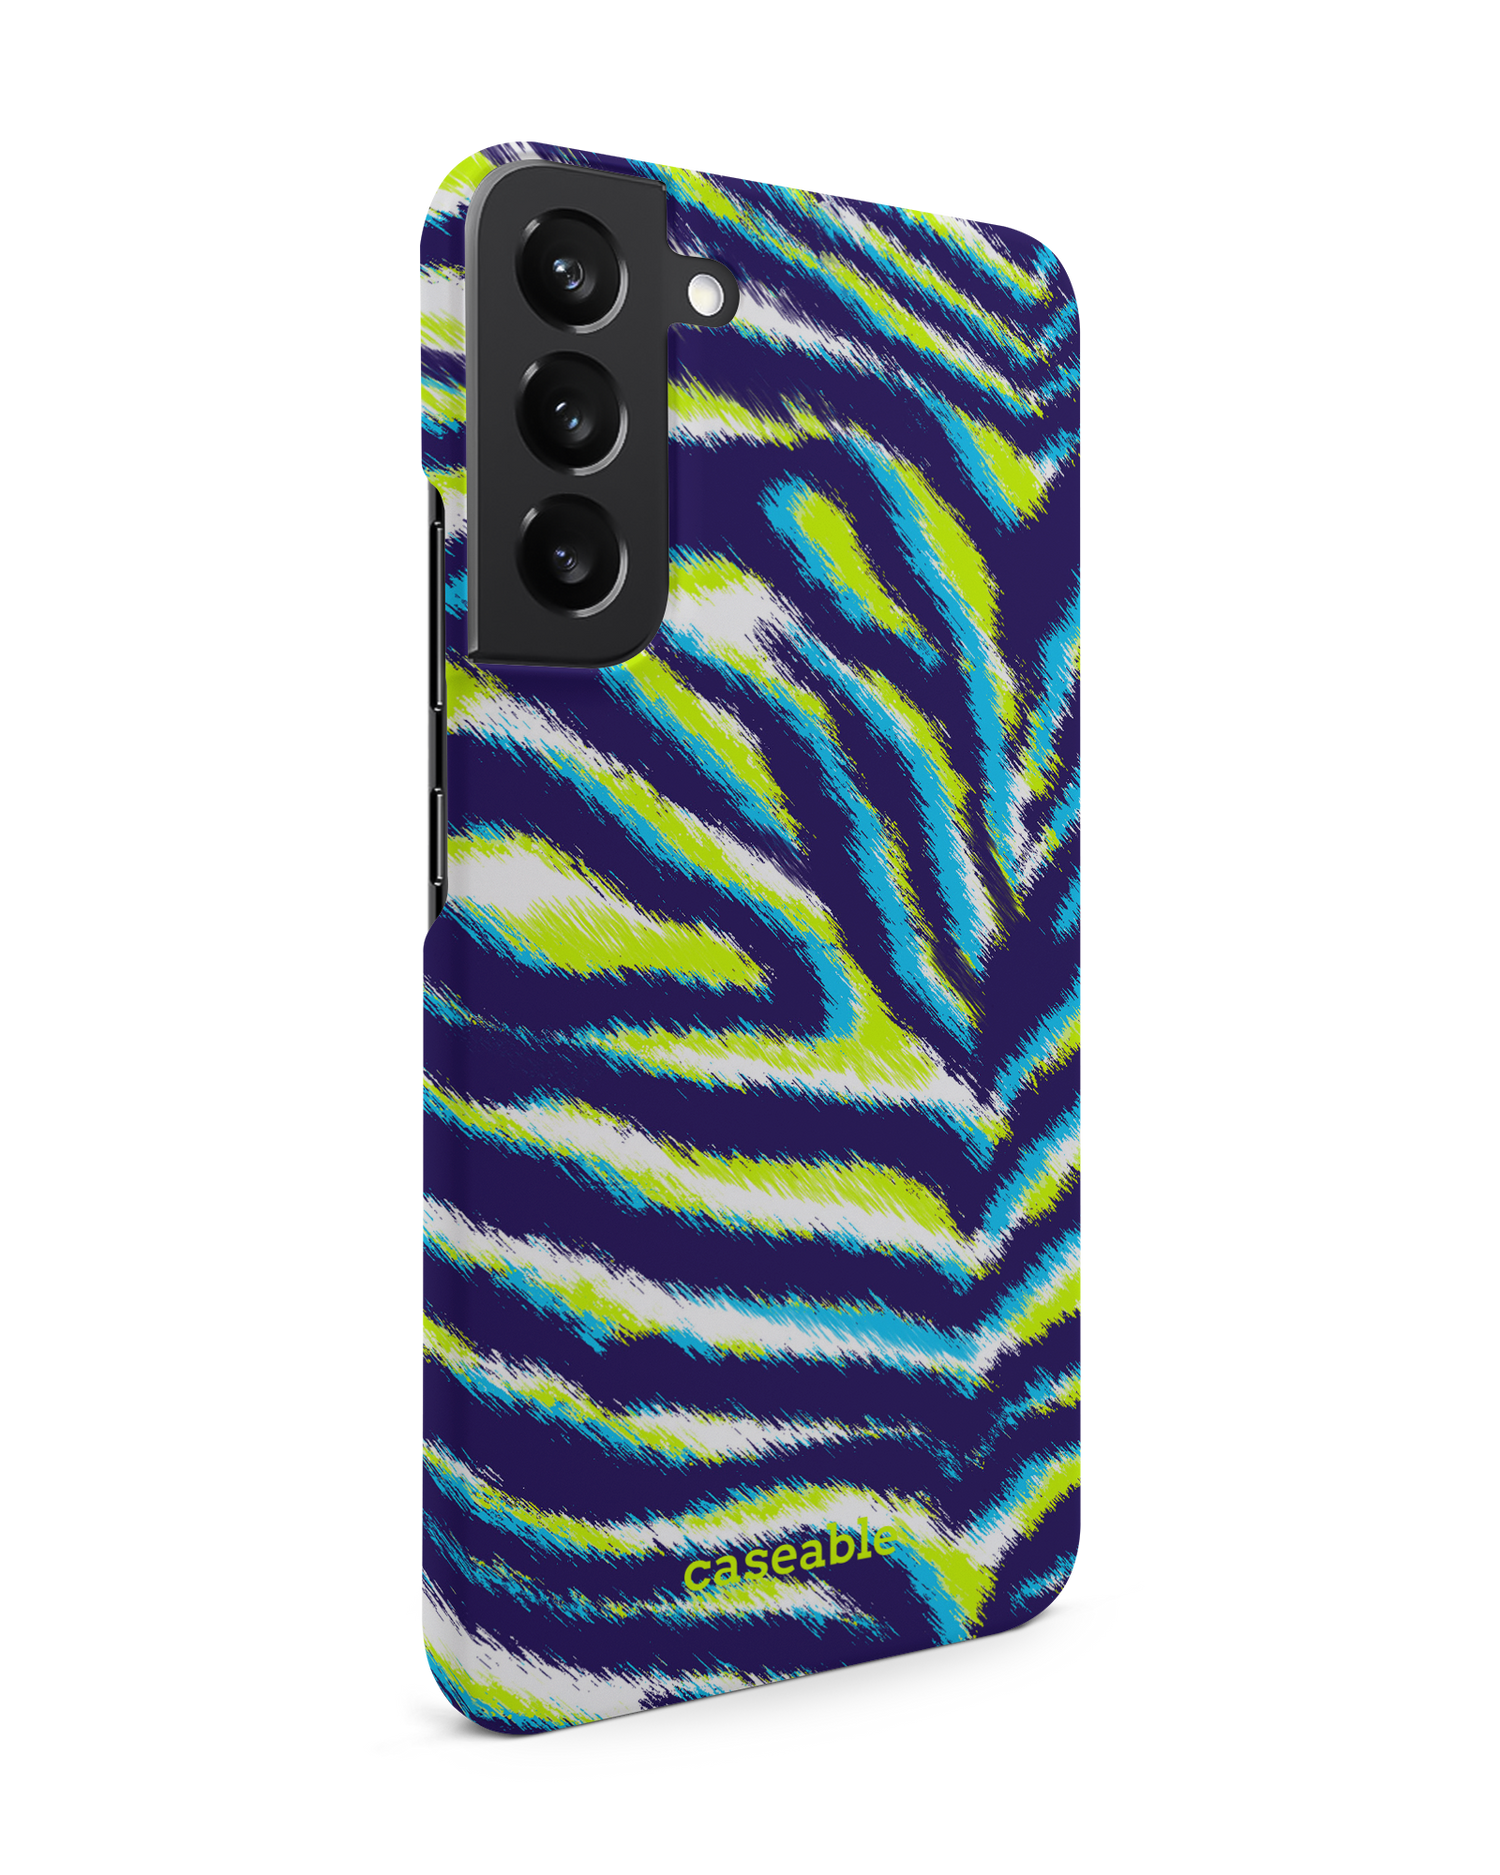 Neon Zebra Hard Shell Phone Case Samsung Galaxy S22 Plus 5G: View from the left side